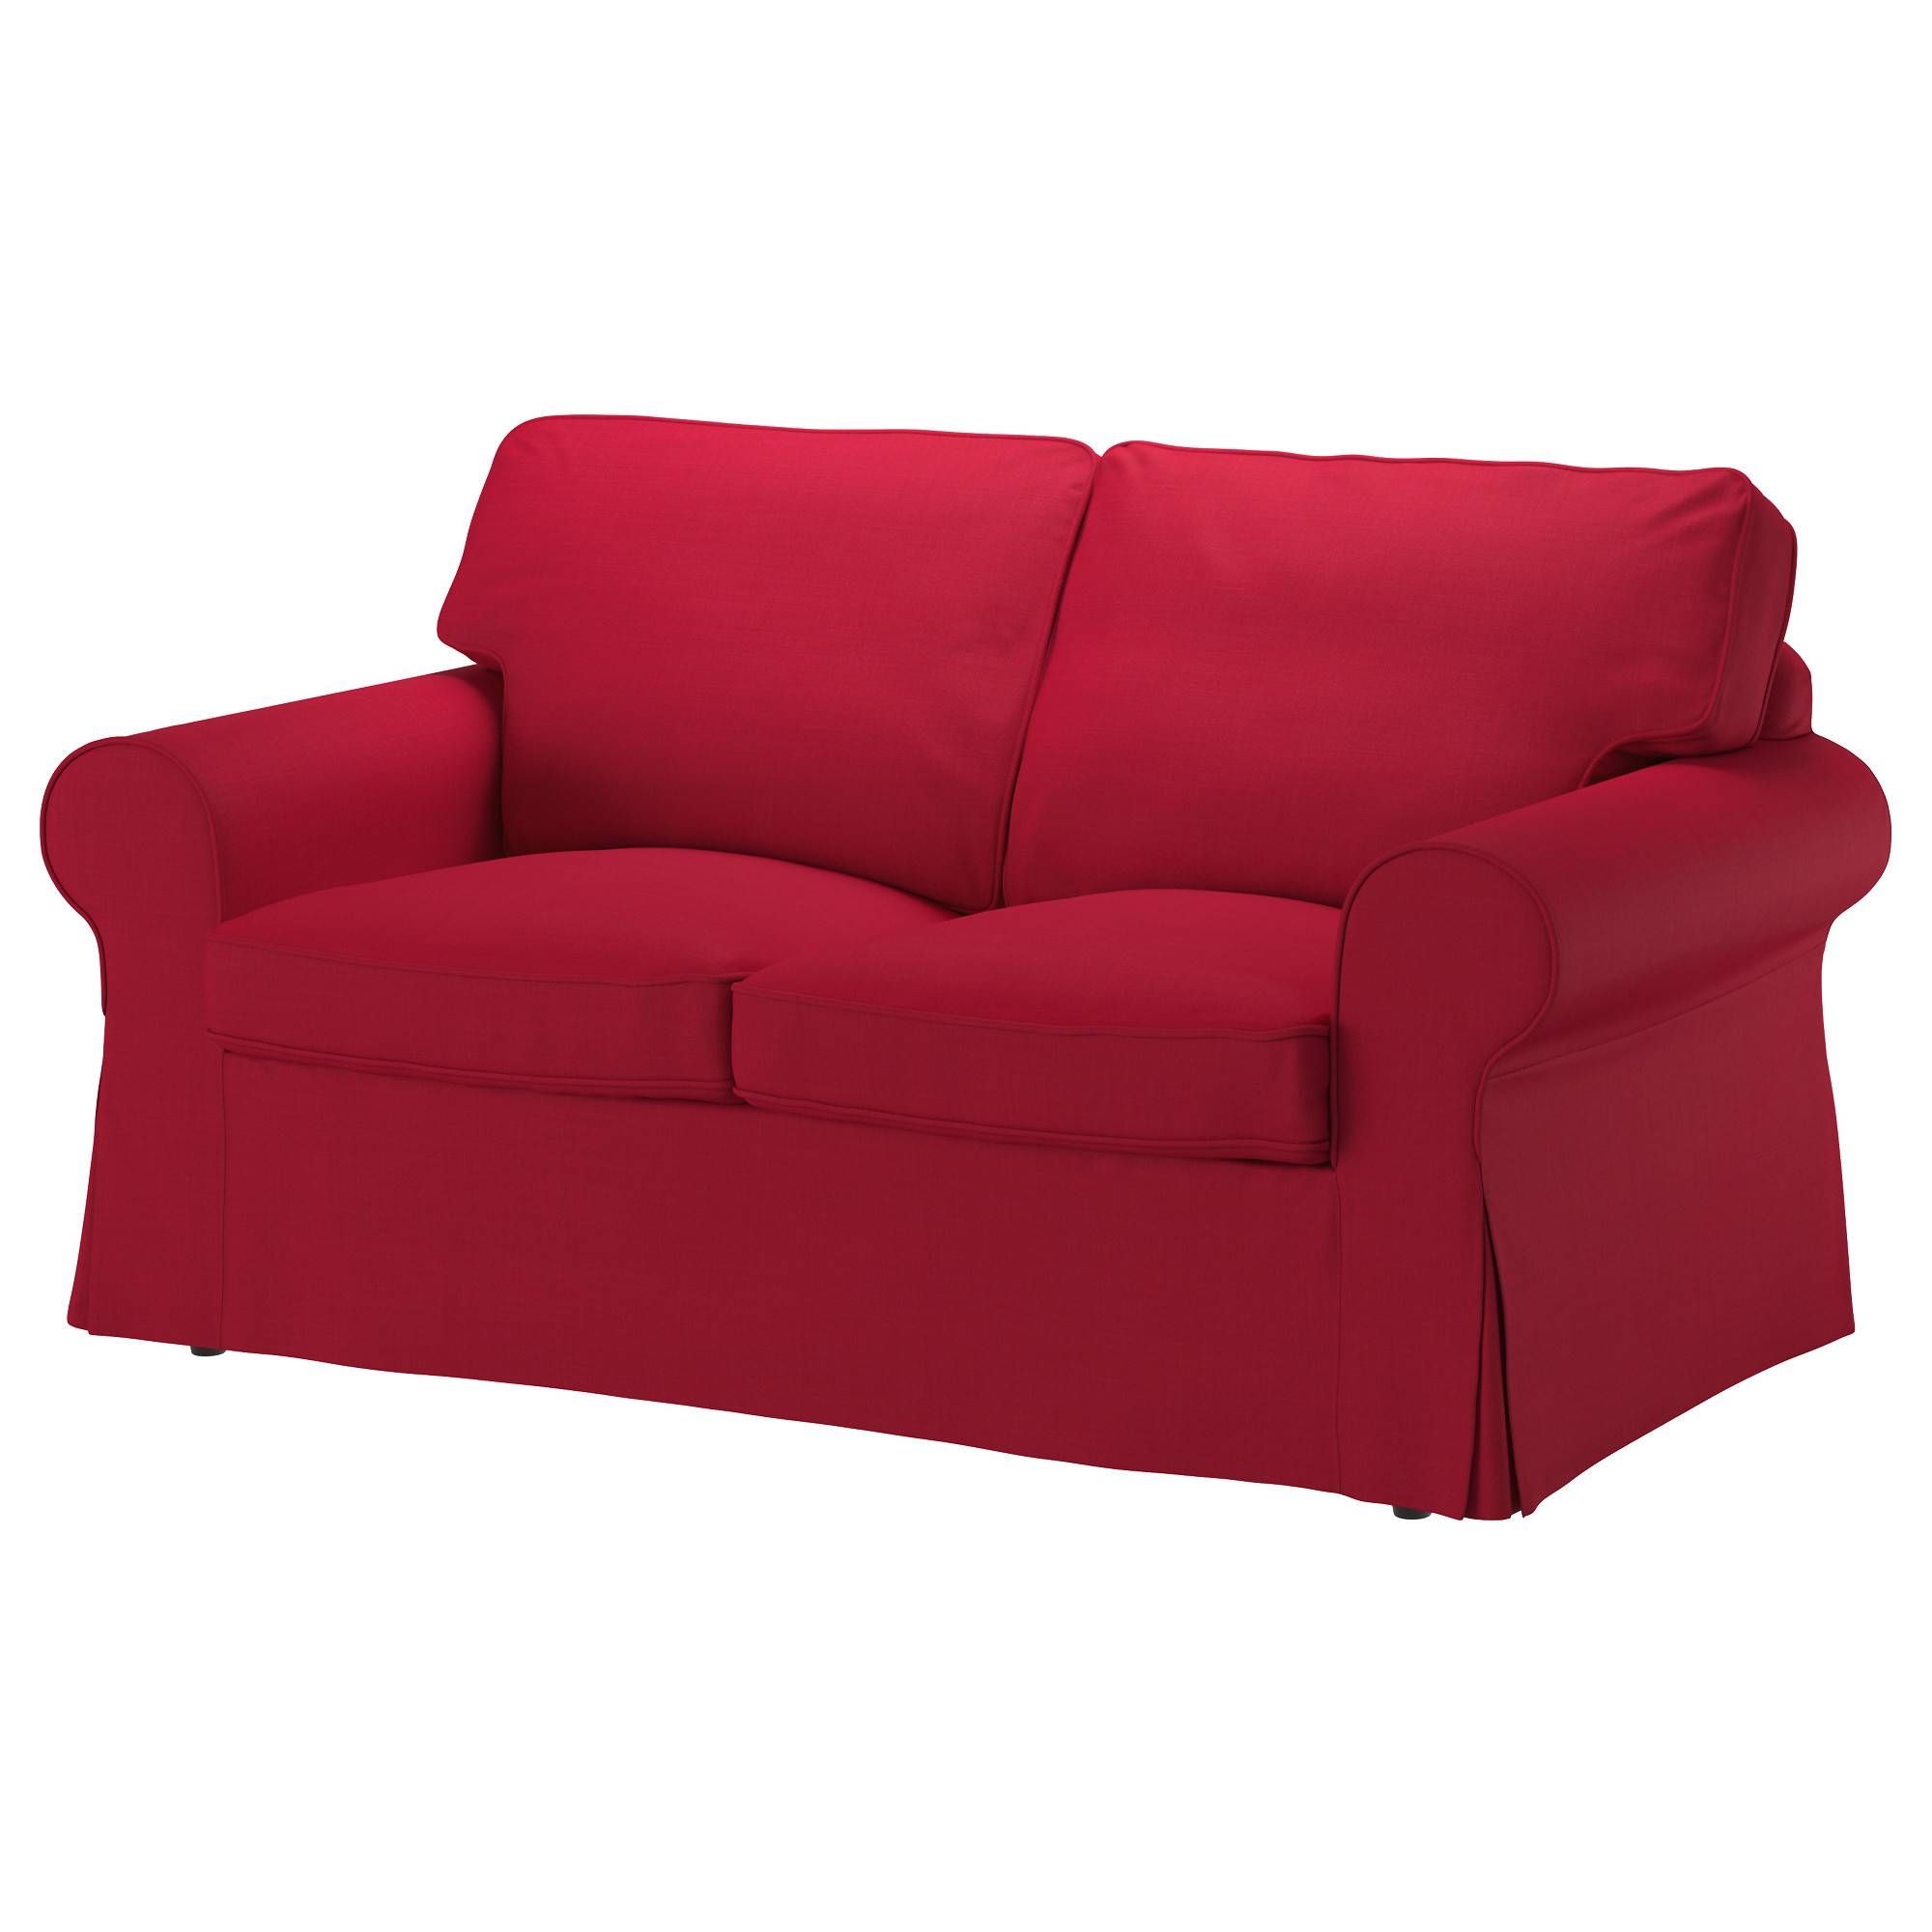 Ektorp Loveseat Cover – Nordvalla Red – Ikea Intended For Red Sofa Beds Ikea (View 10 of 30)